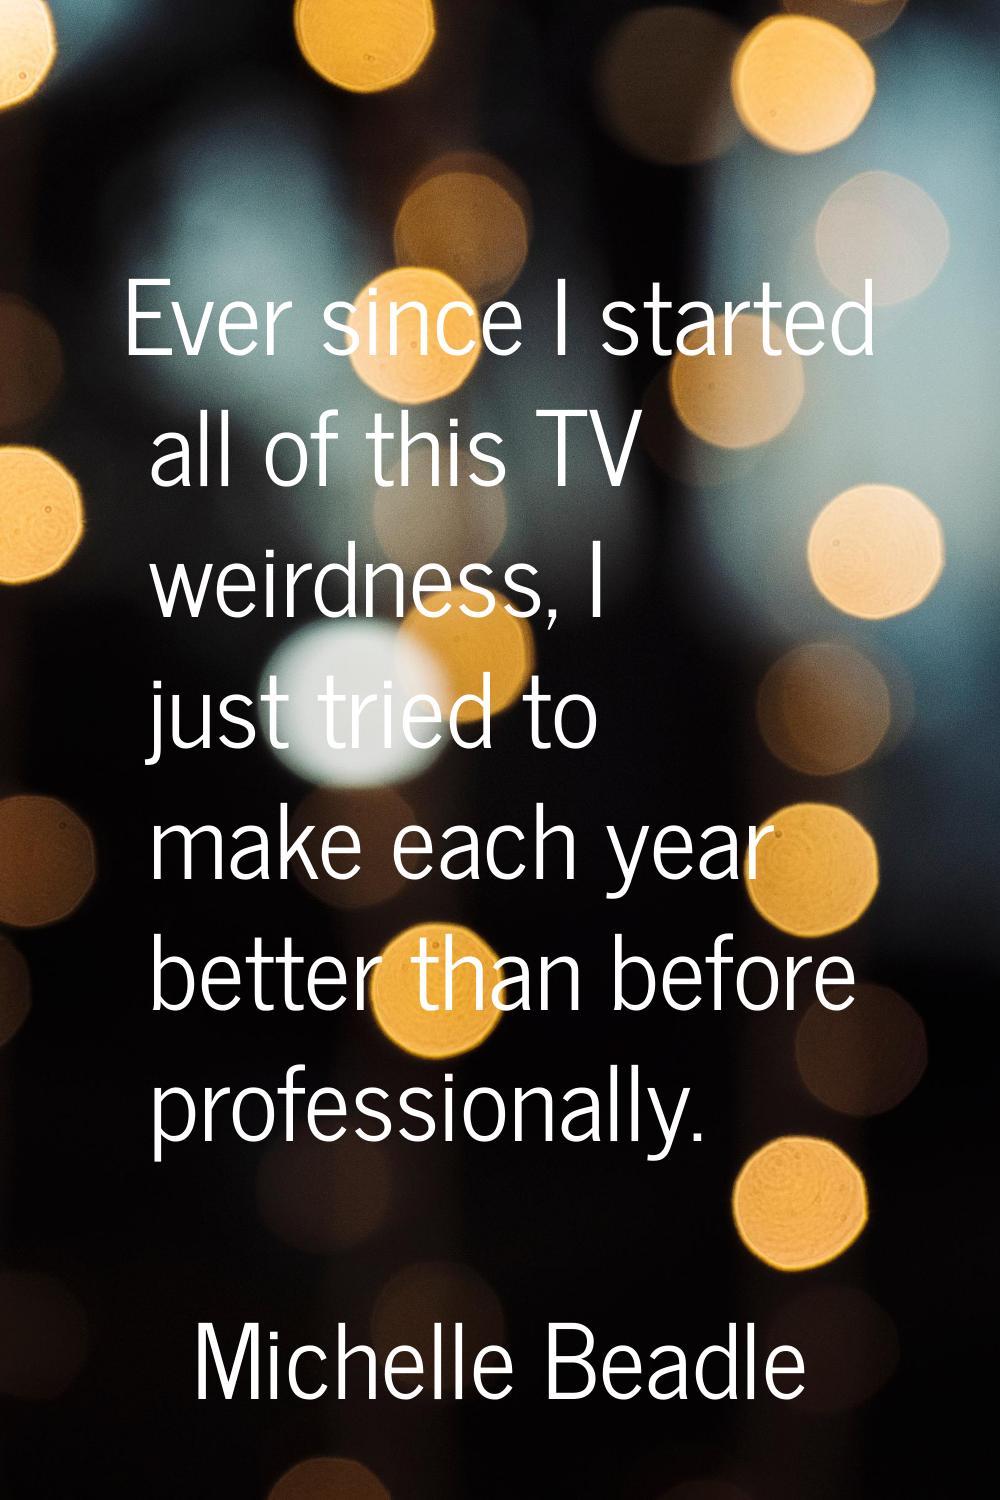 Ever since I started all of this TV weirdness, I just tried to make each year better than before pr